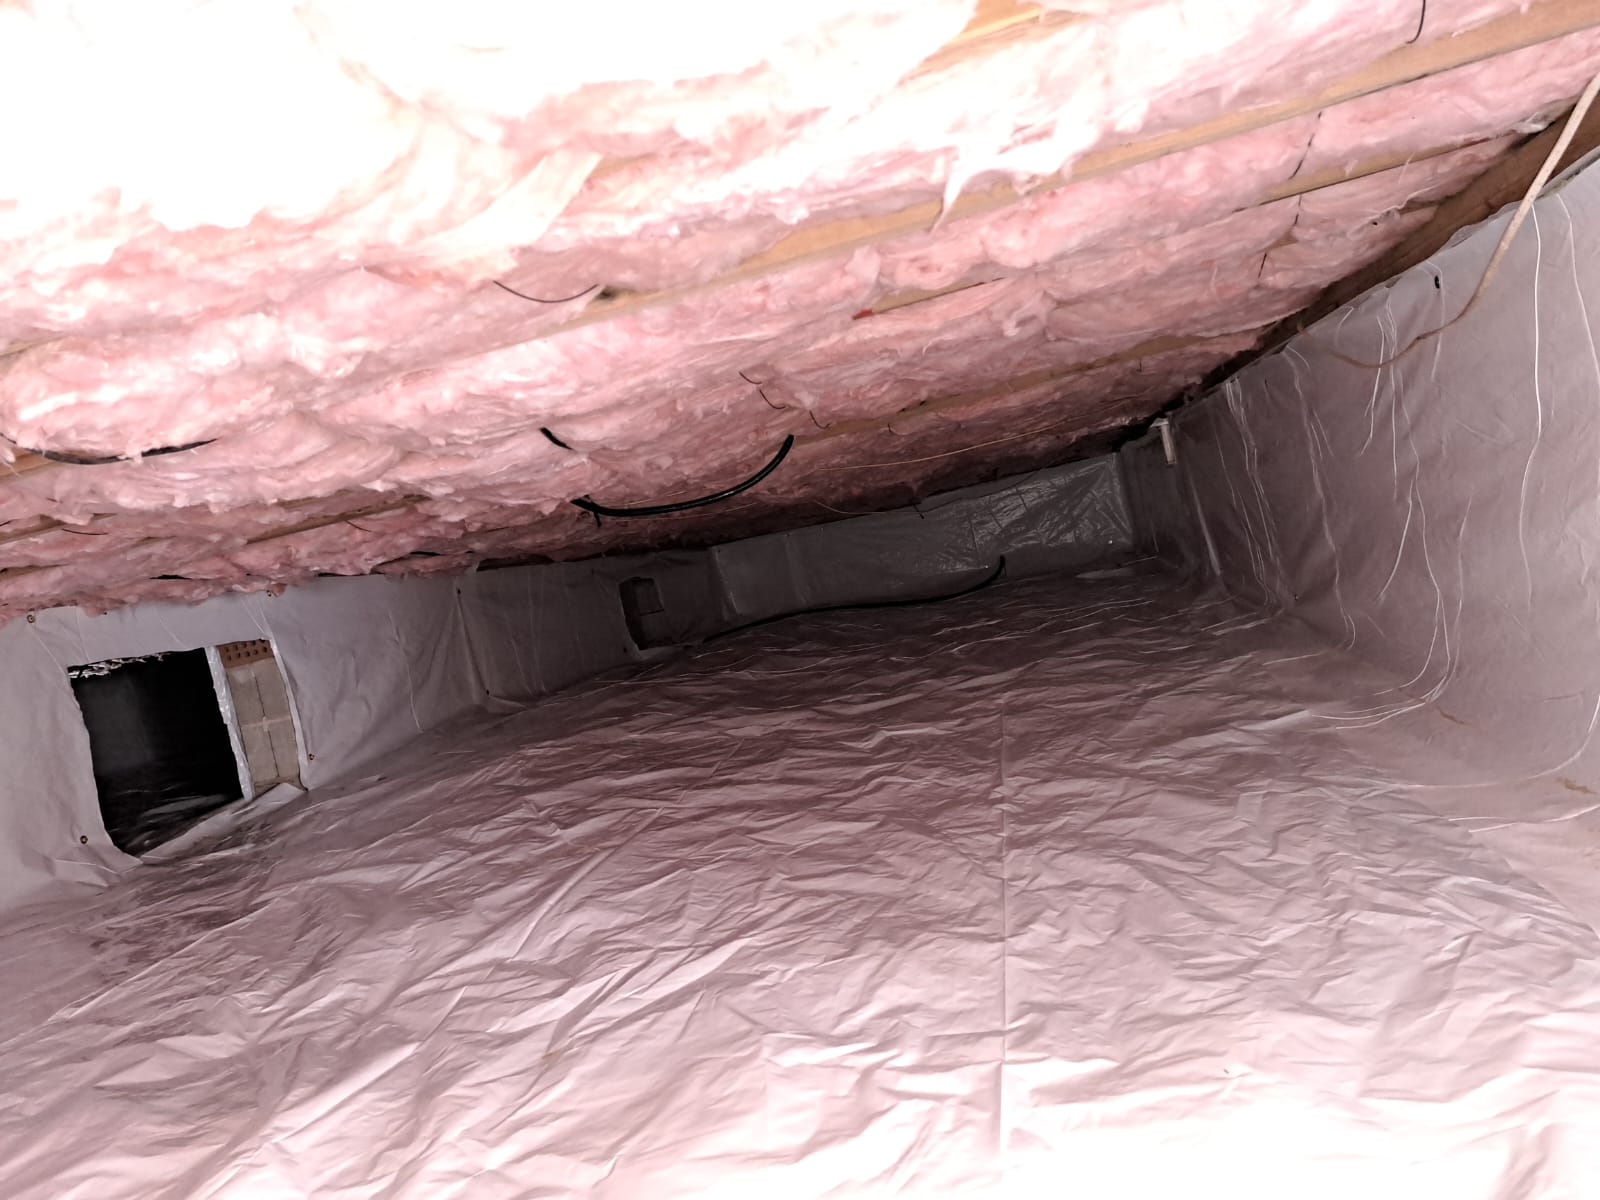 CRAWL SPACE CLEANING AND DECONTAMINATION - Master Attic